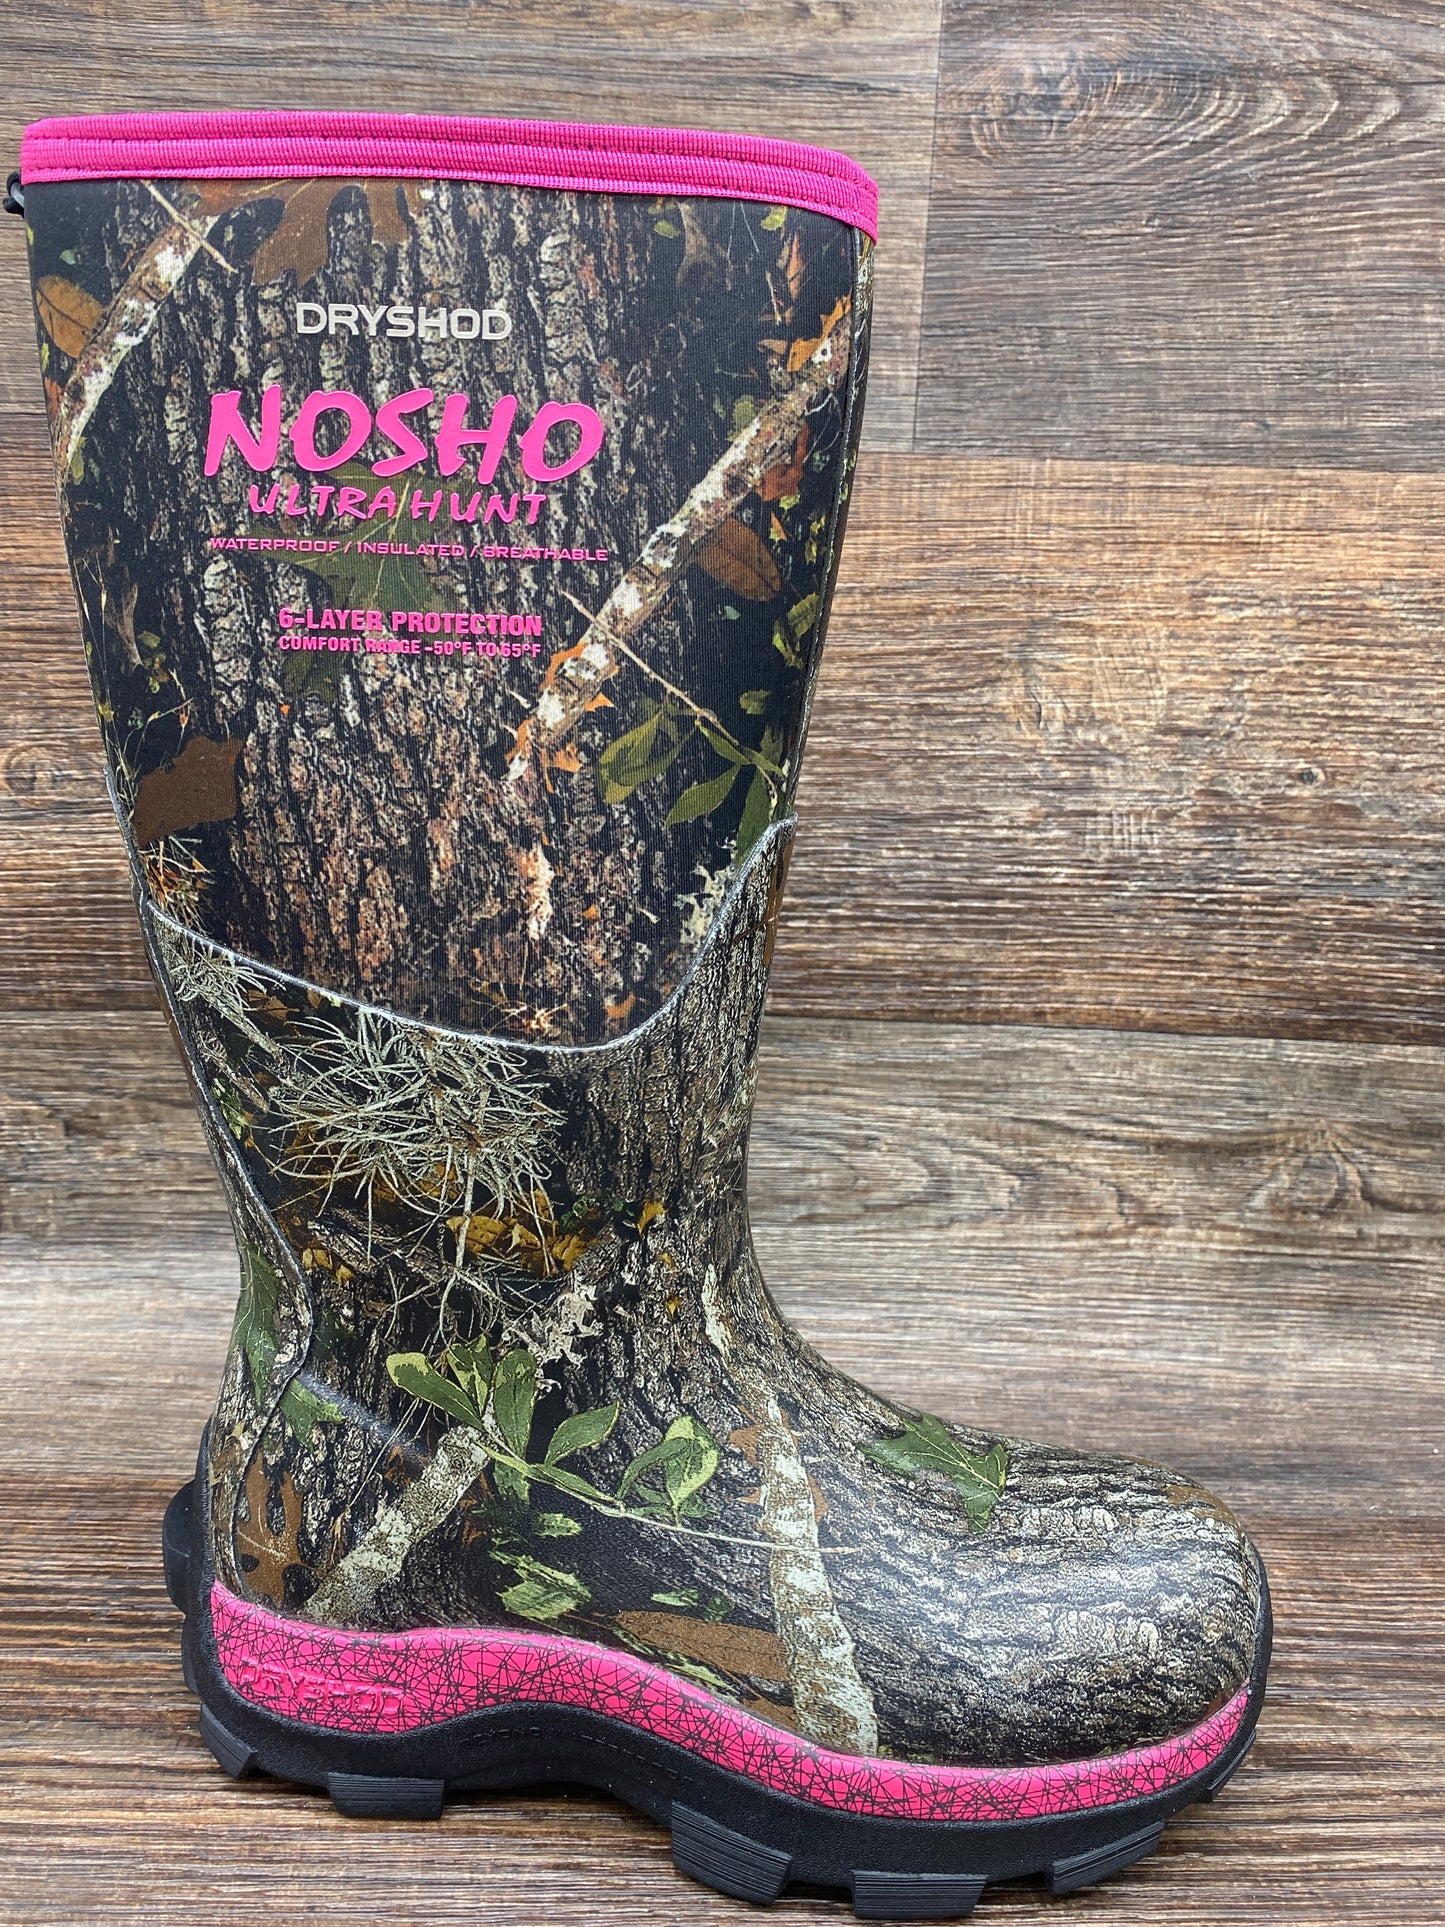 mbm-wh-pn Women's NoSho Ultra Hunt Cold Conditions Rubber Boot by DryShod